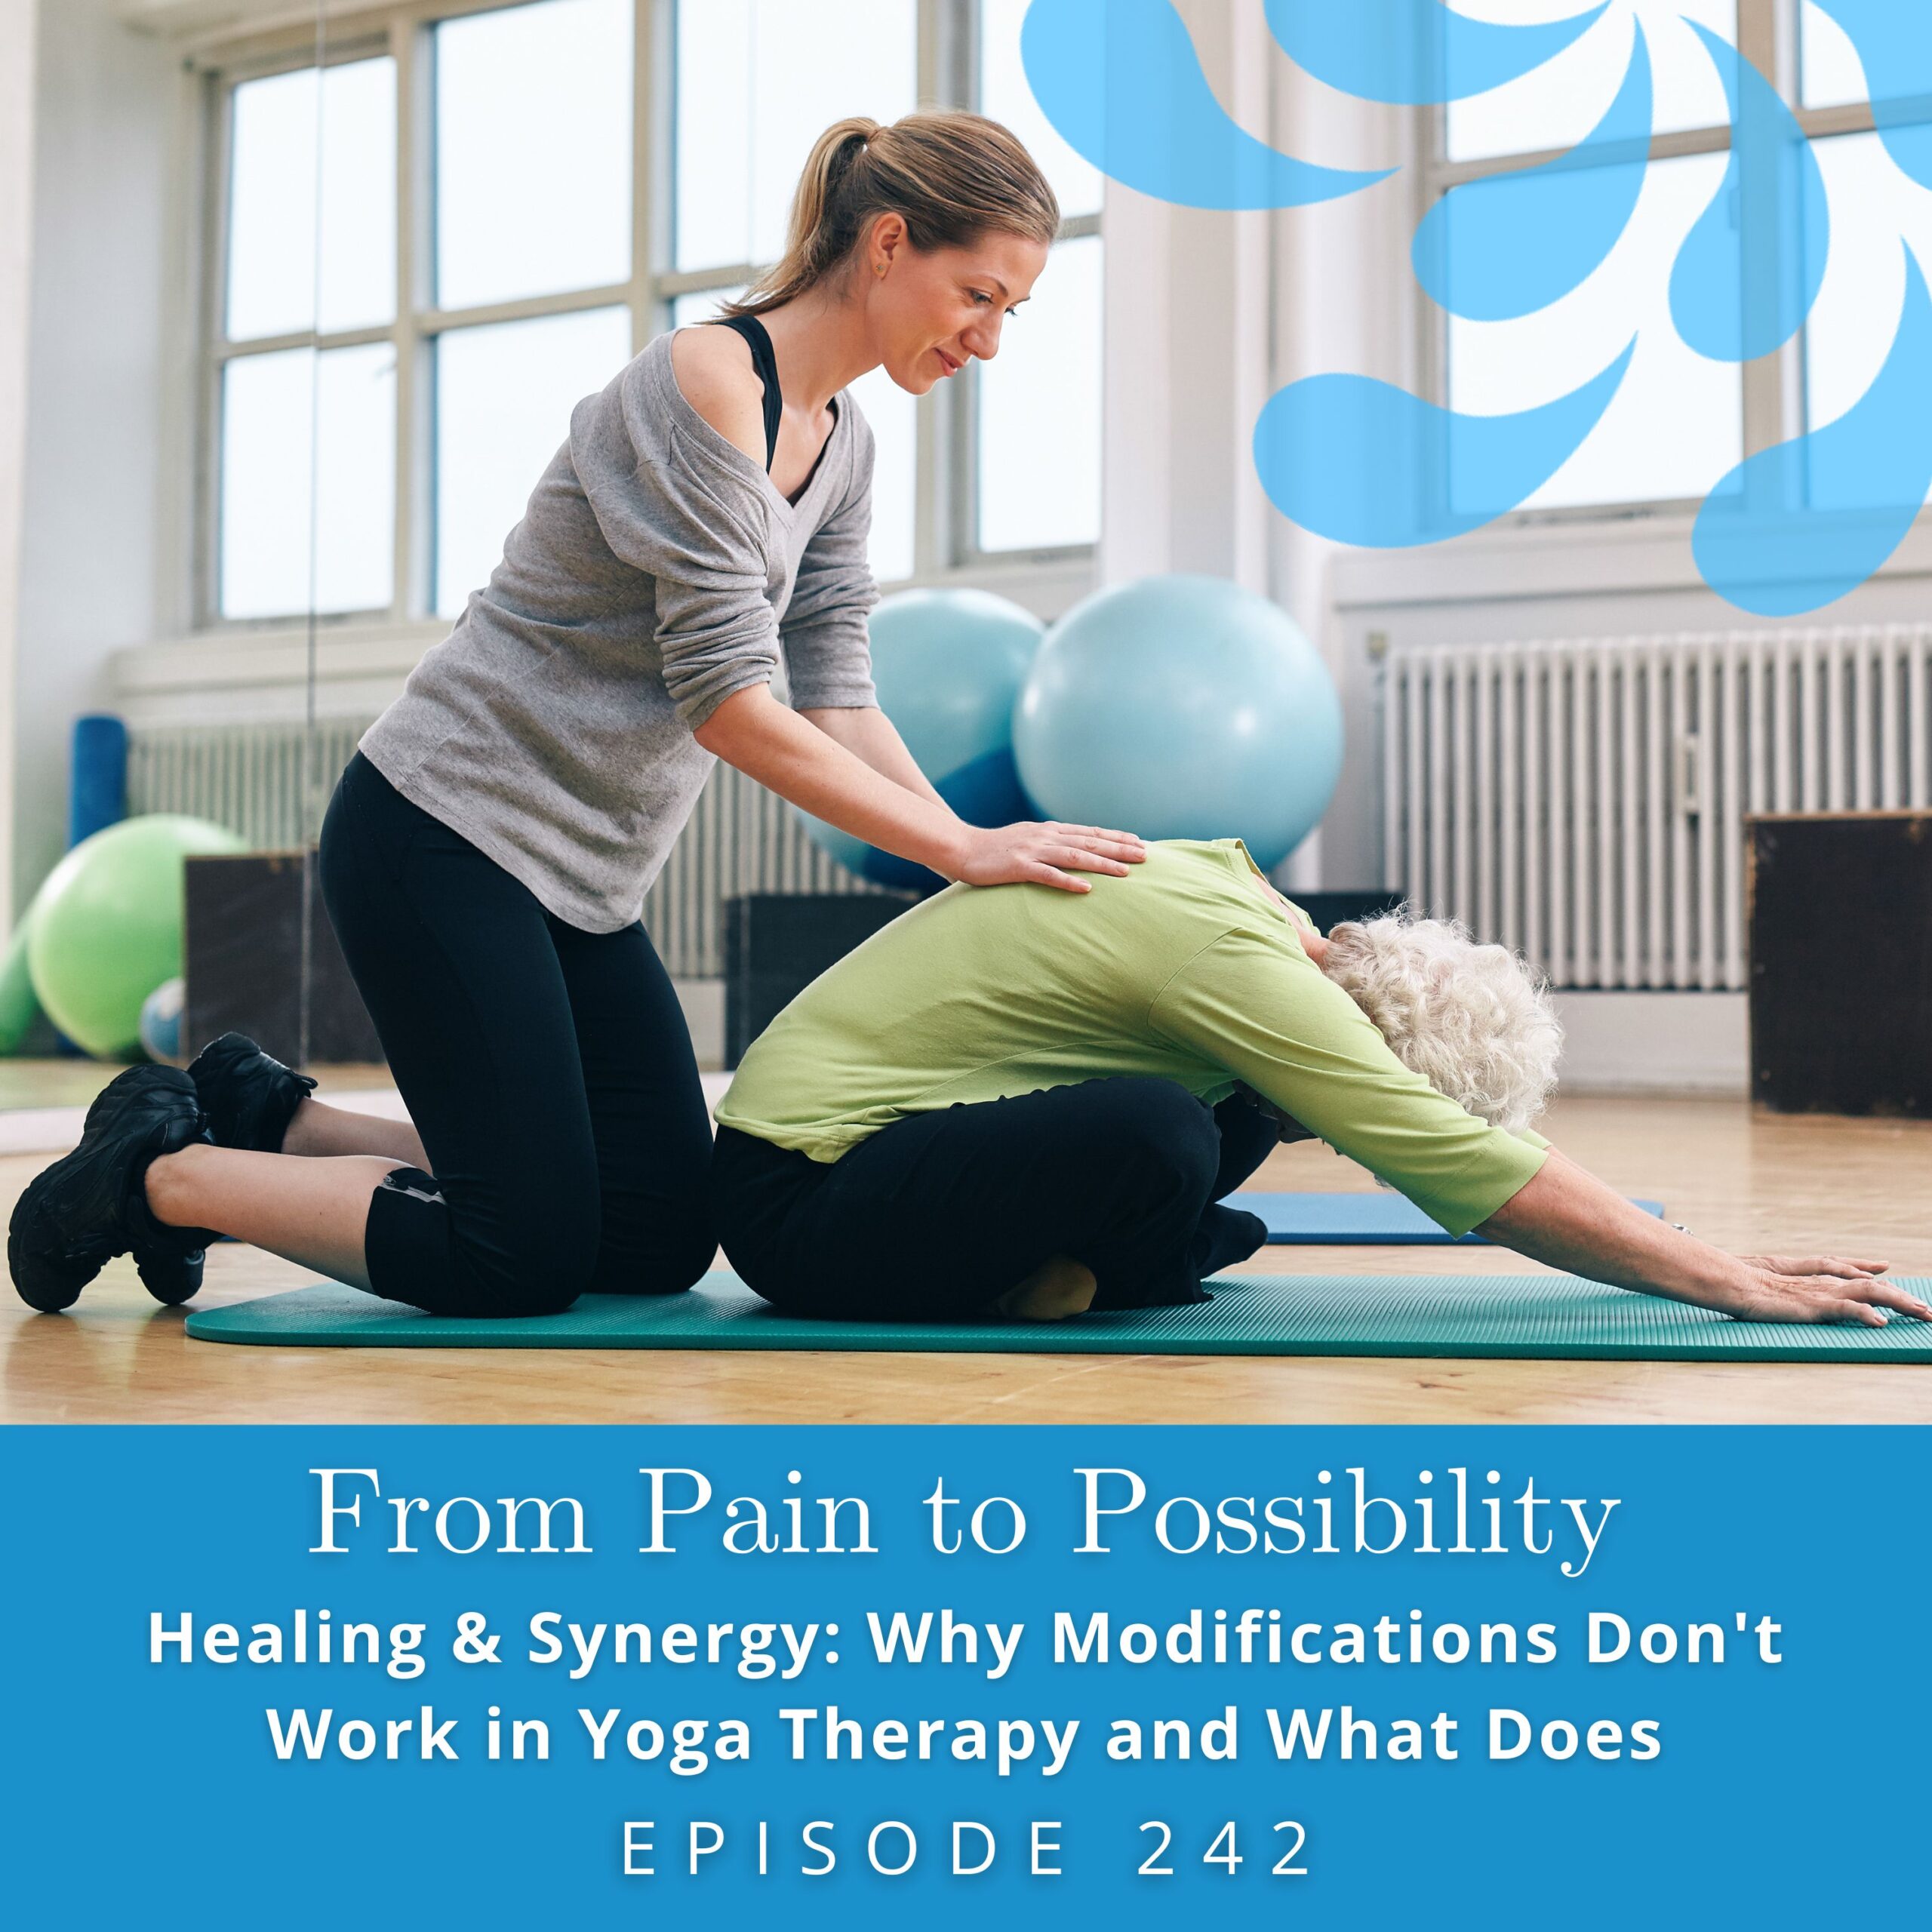 From Pain to Possibility with Susi Hately | Healing & Synergy: Why Modifications Don't Work in Yoga Therapy and What Does